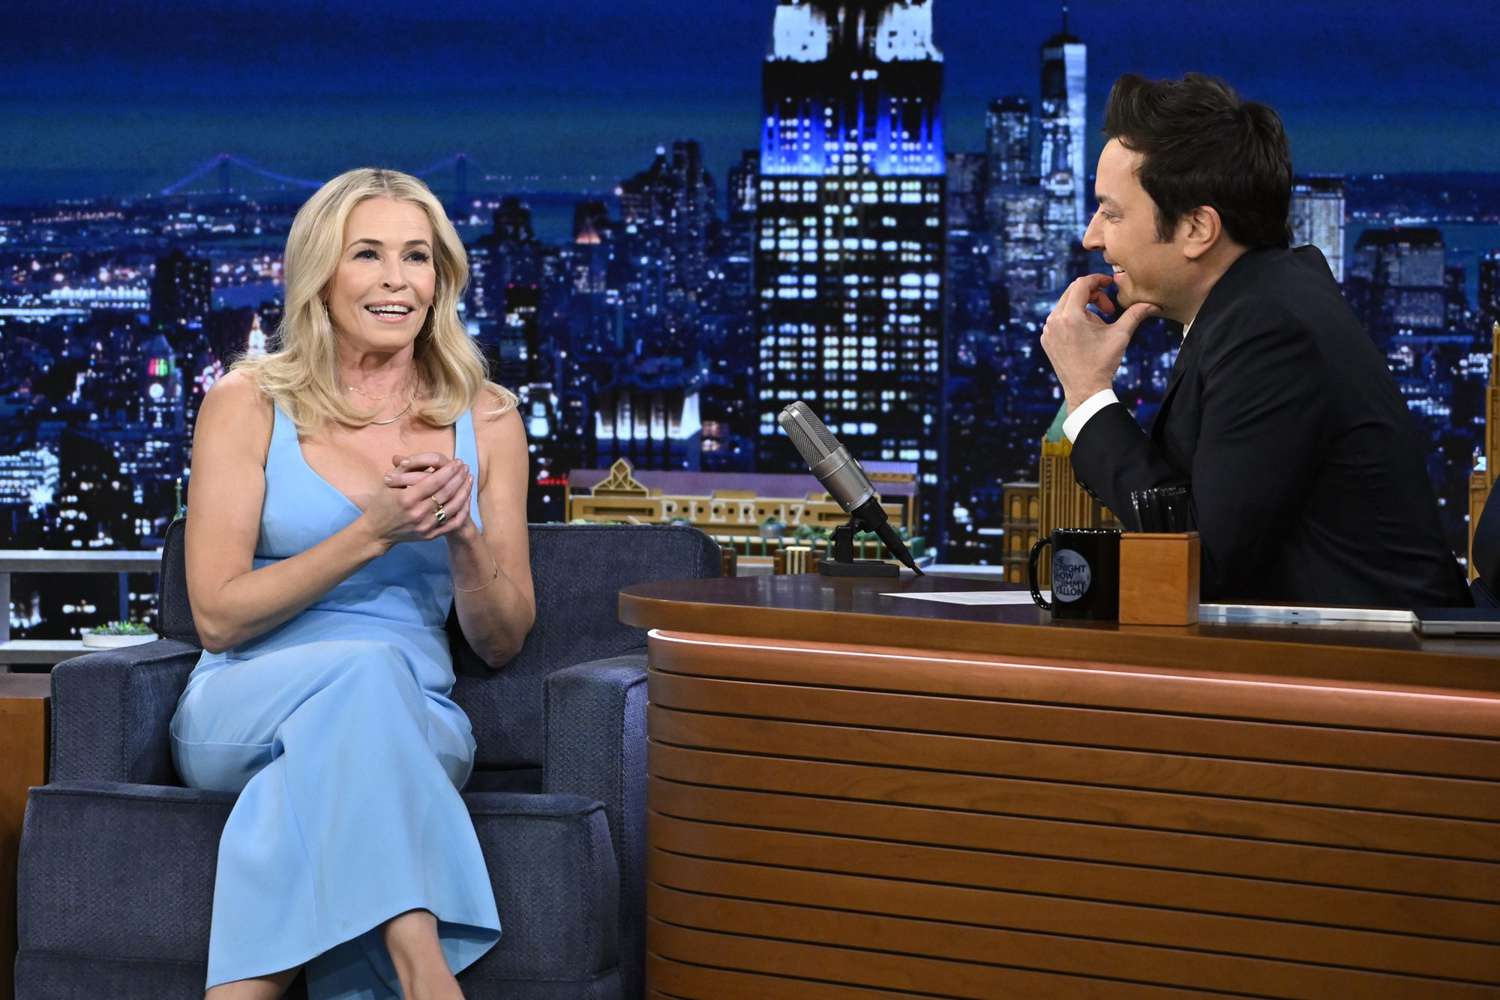 Comedian Chelsea Handler during interview with host Jimmy Fallon